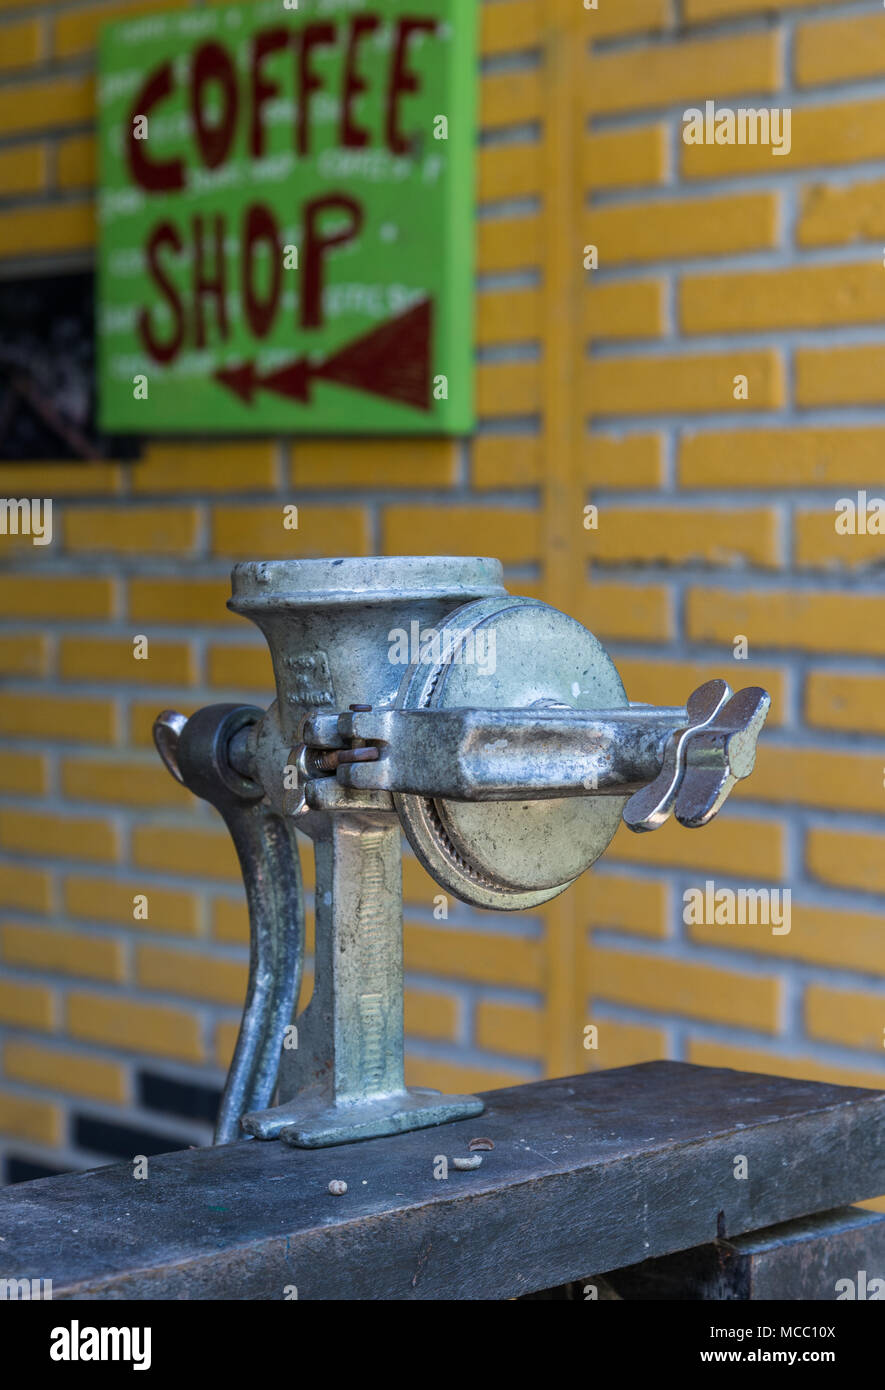 A manual coffee grinder in front of a coffee shop. Minca, Colombia, South America. Stock Photo